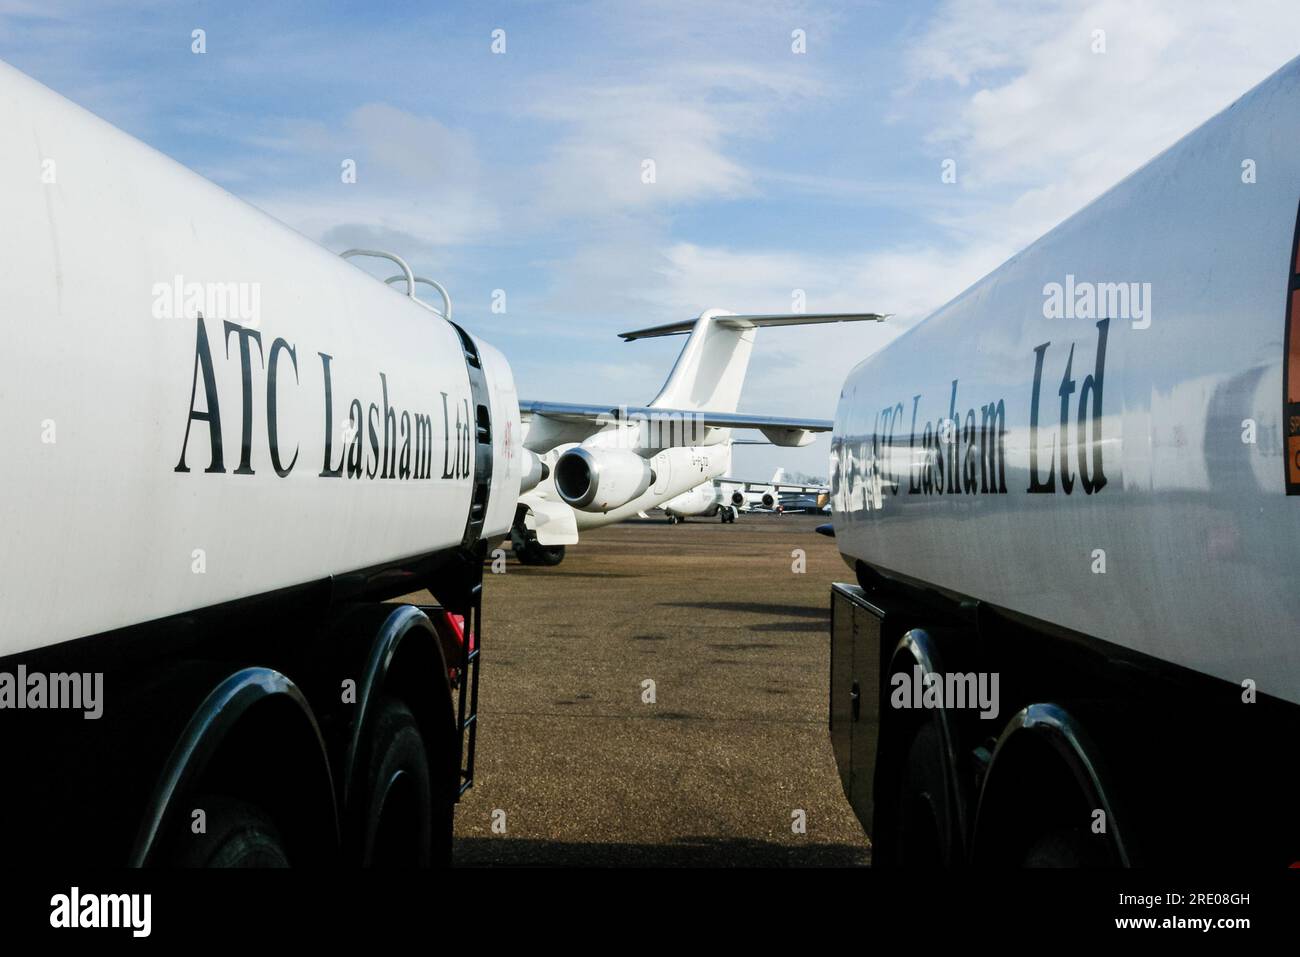 ATC Lasham Ltd, aircraft engineering company at London Southend Airport, Essex, UK. Aircraft framed by fuel tankers with branding Stock Photo